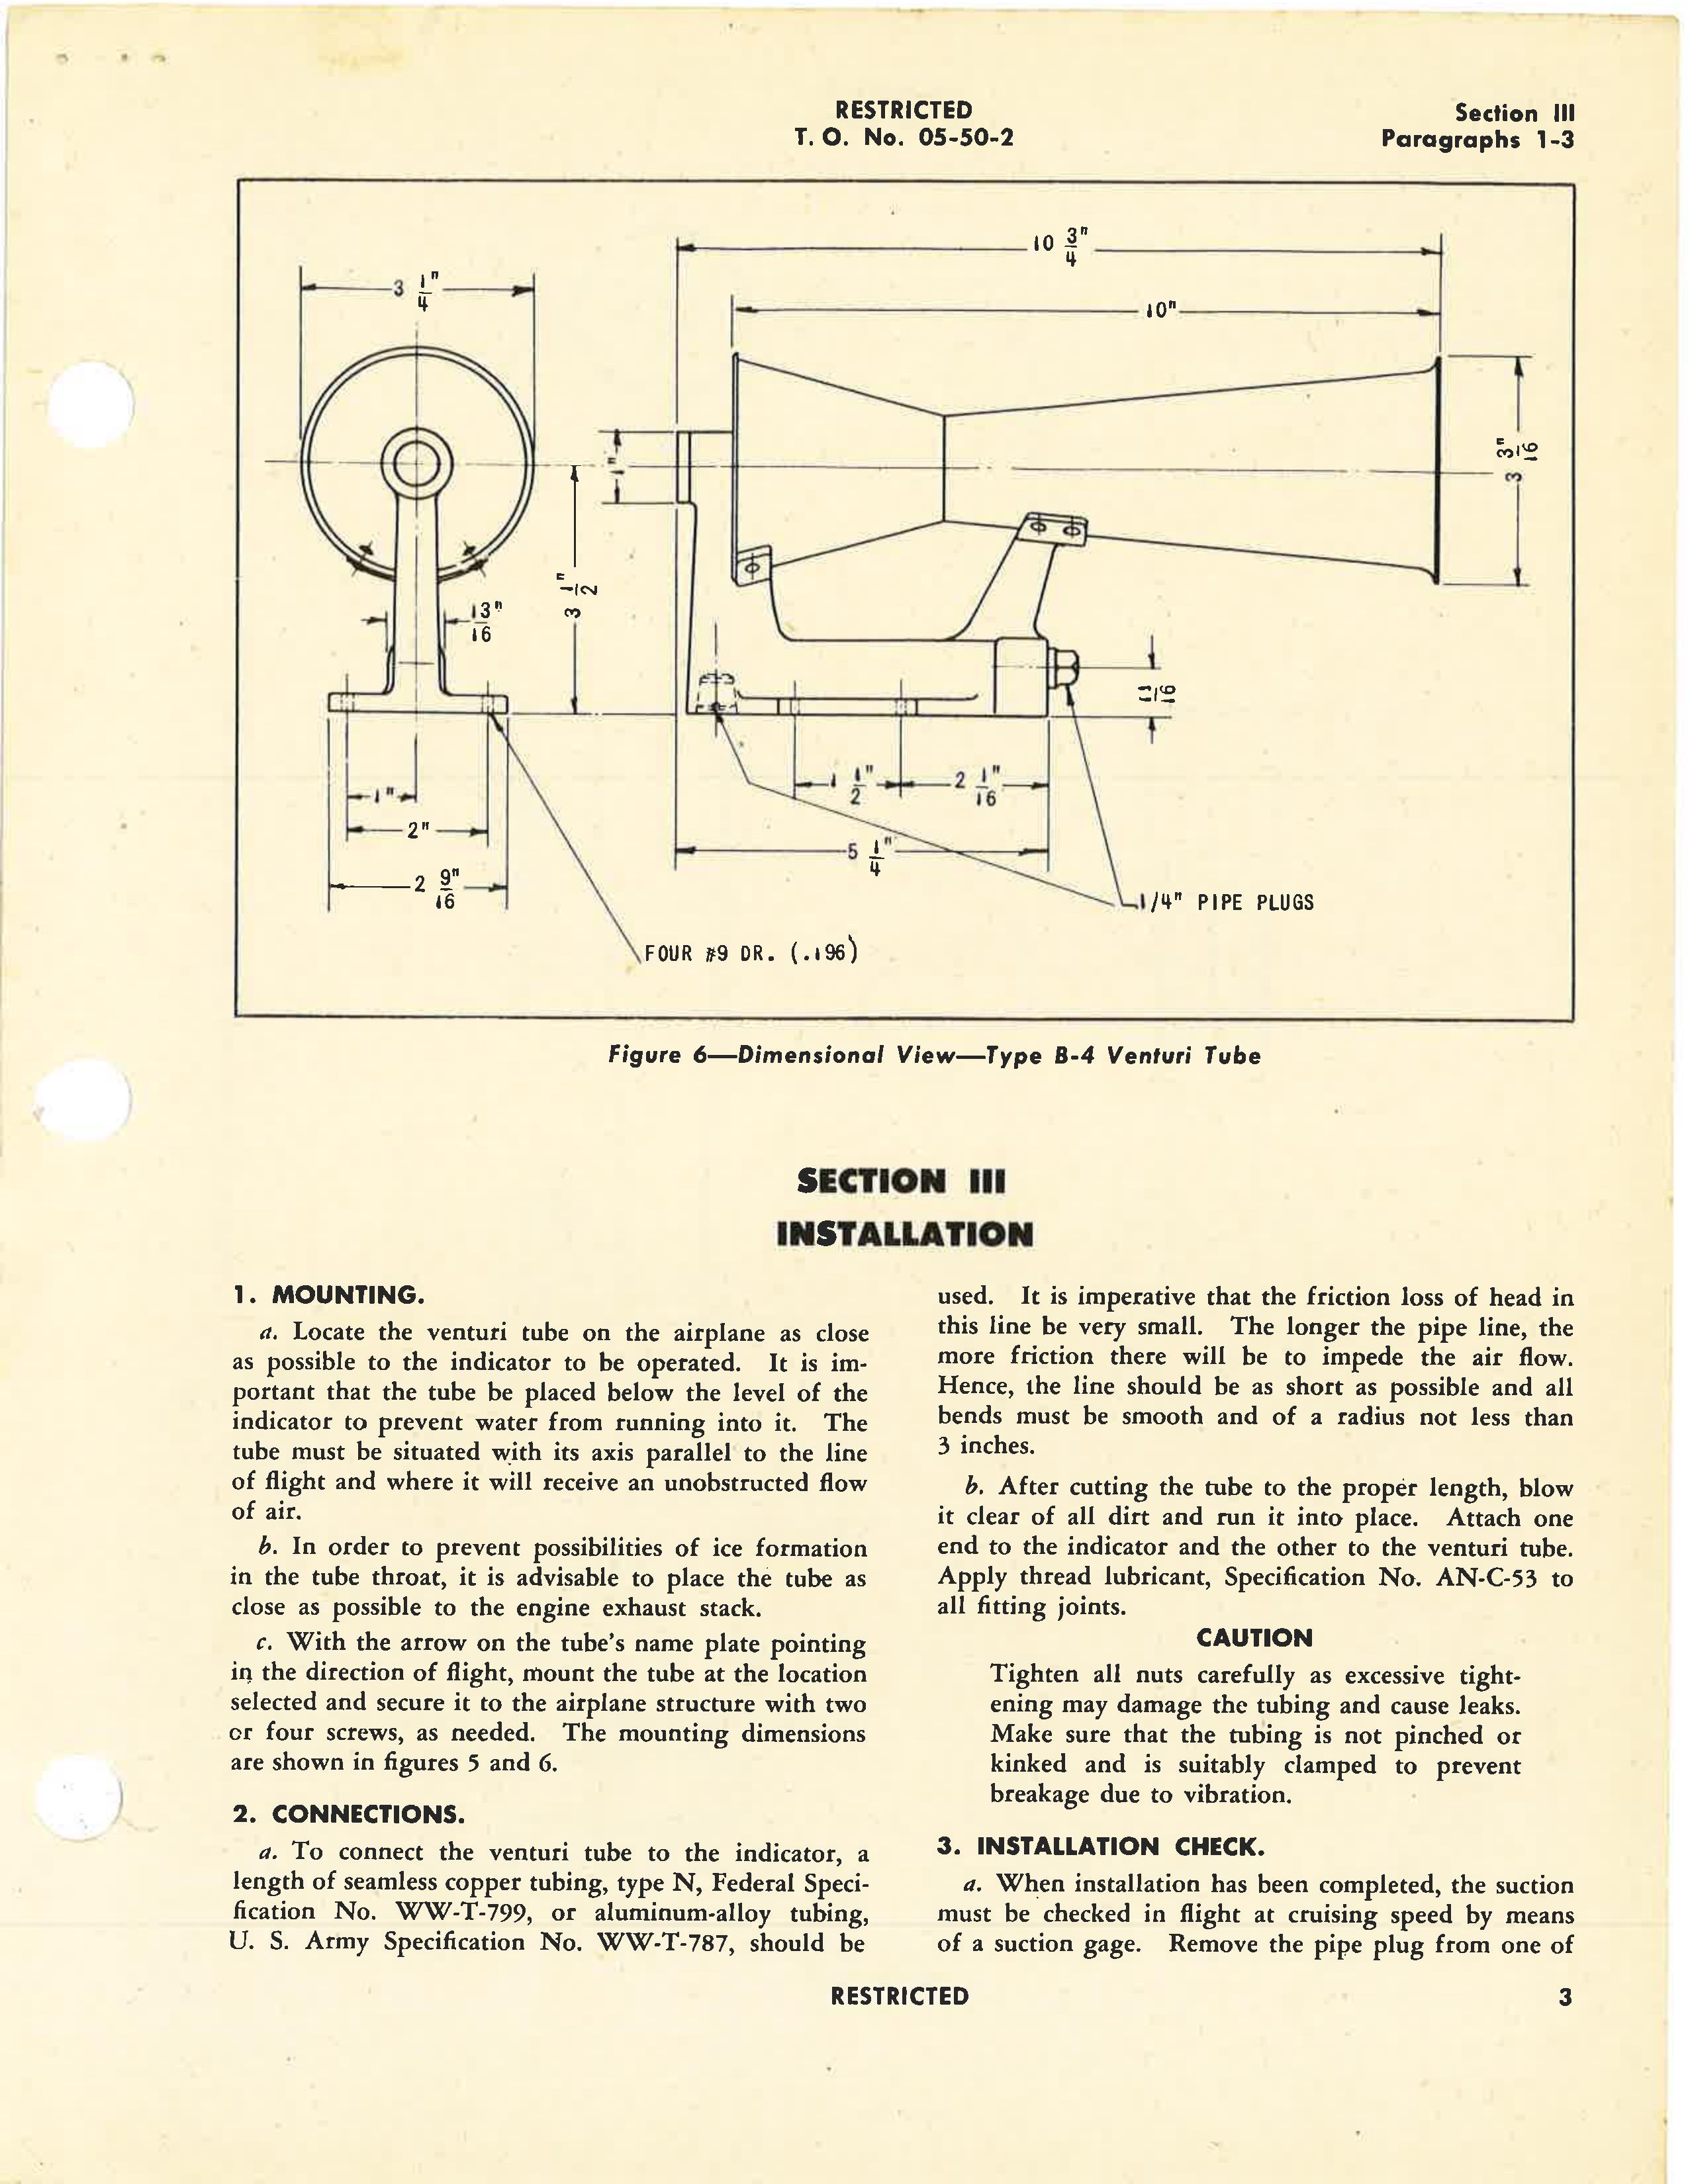 Sample page 9 from AirCorps Library document: Handbook of Instructions with Parts Catalog for Types A-3, A-3A and B-4, Power Veturi Tubes